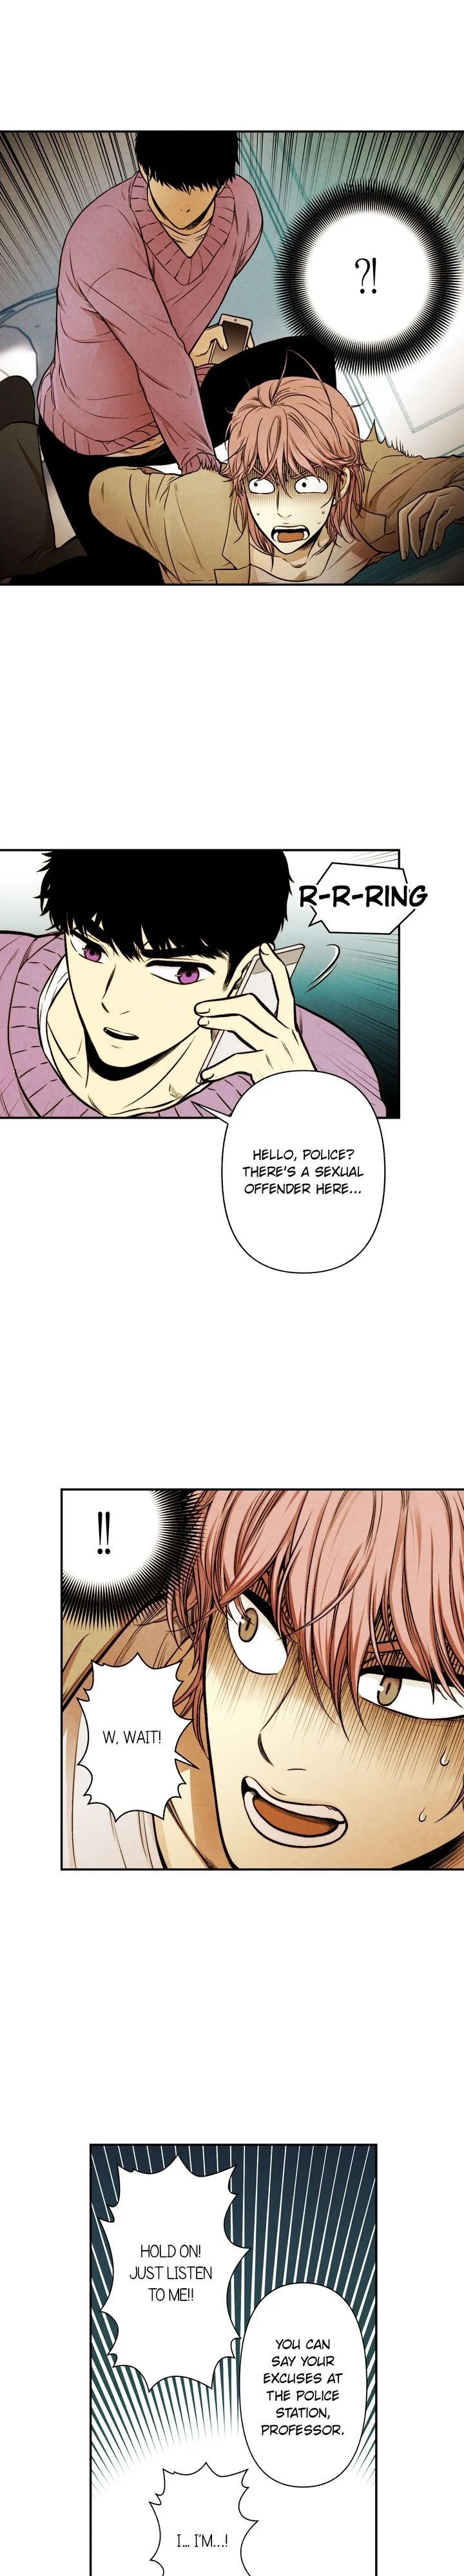 just-give-it-to-me-chap-34-2